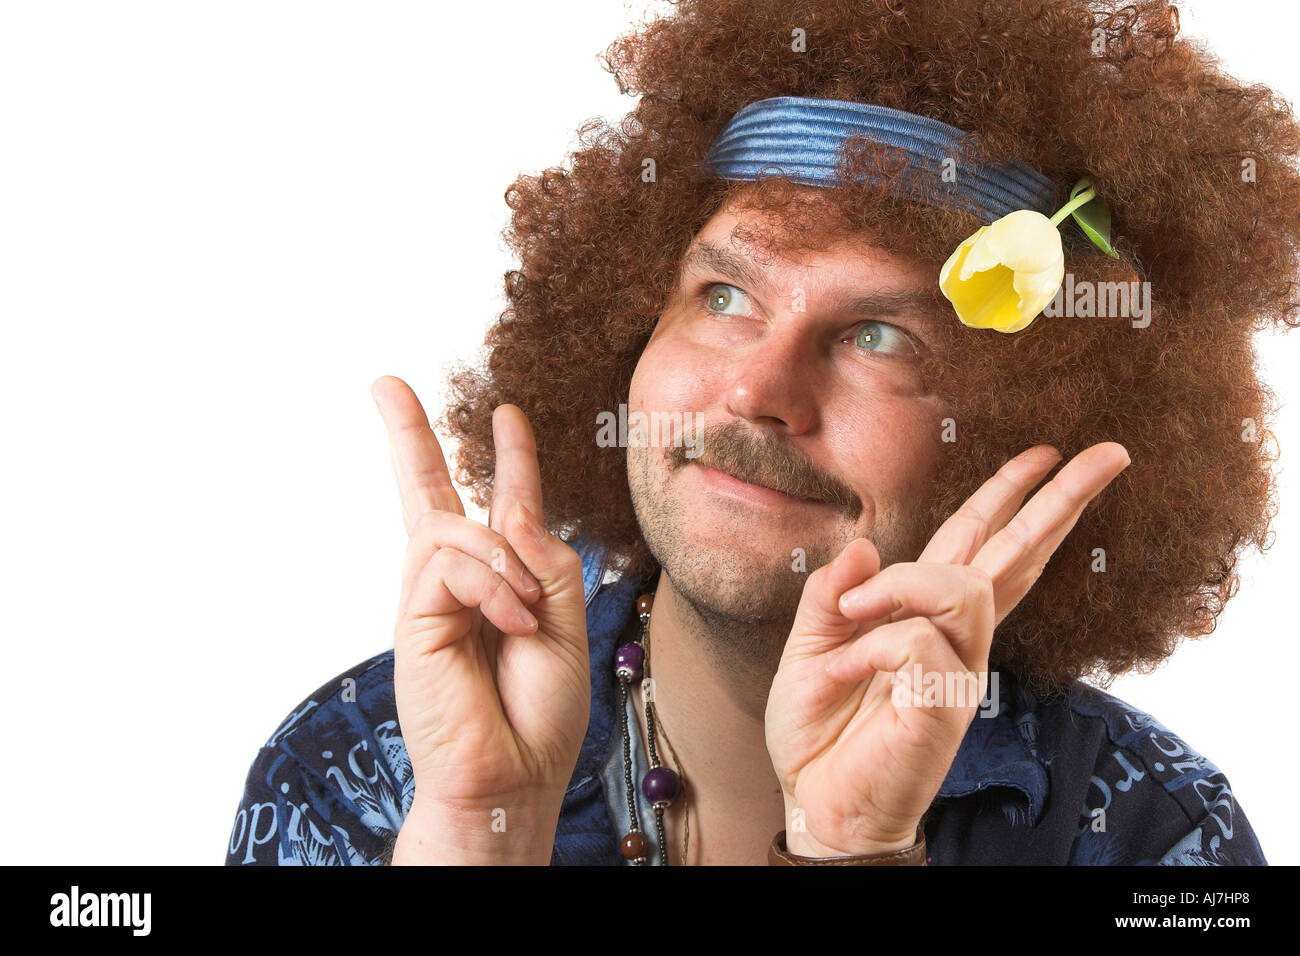 A slightly too old hippie making the peace sign with a tulip in his hair Stock Photo